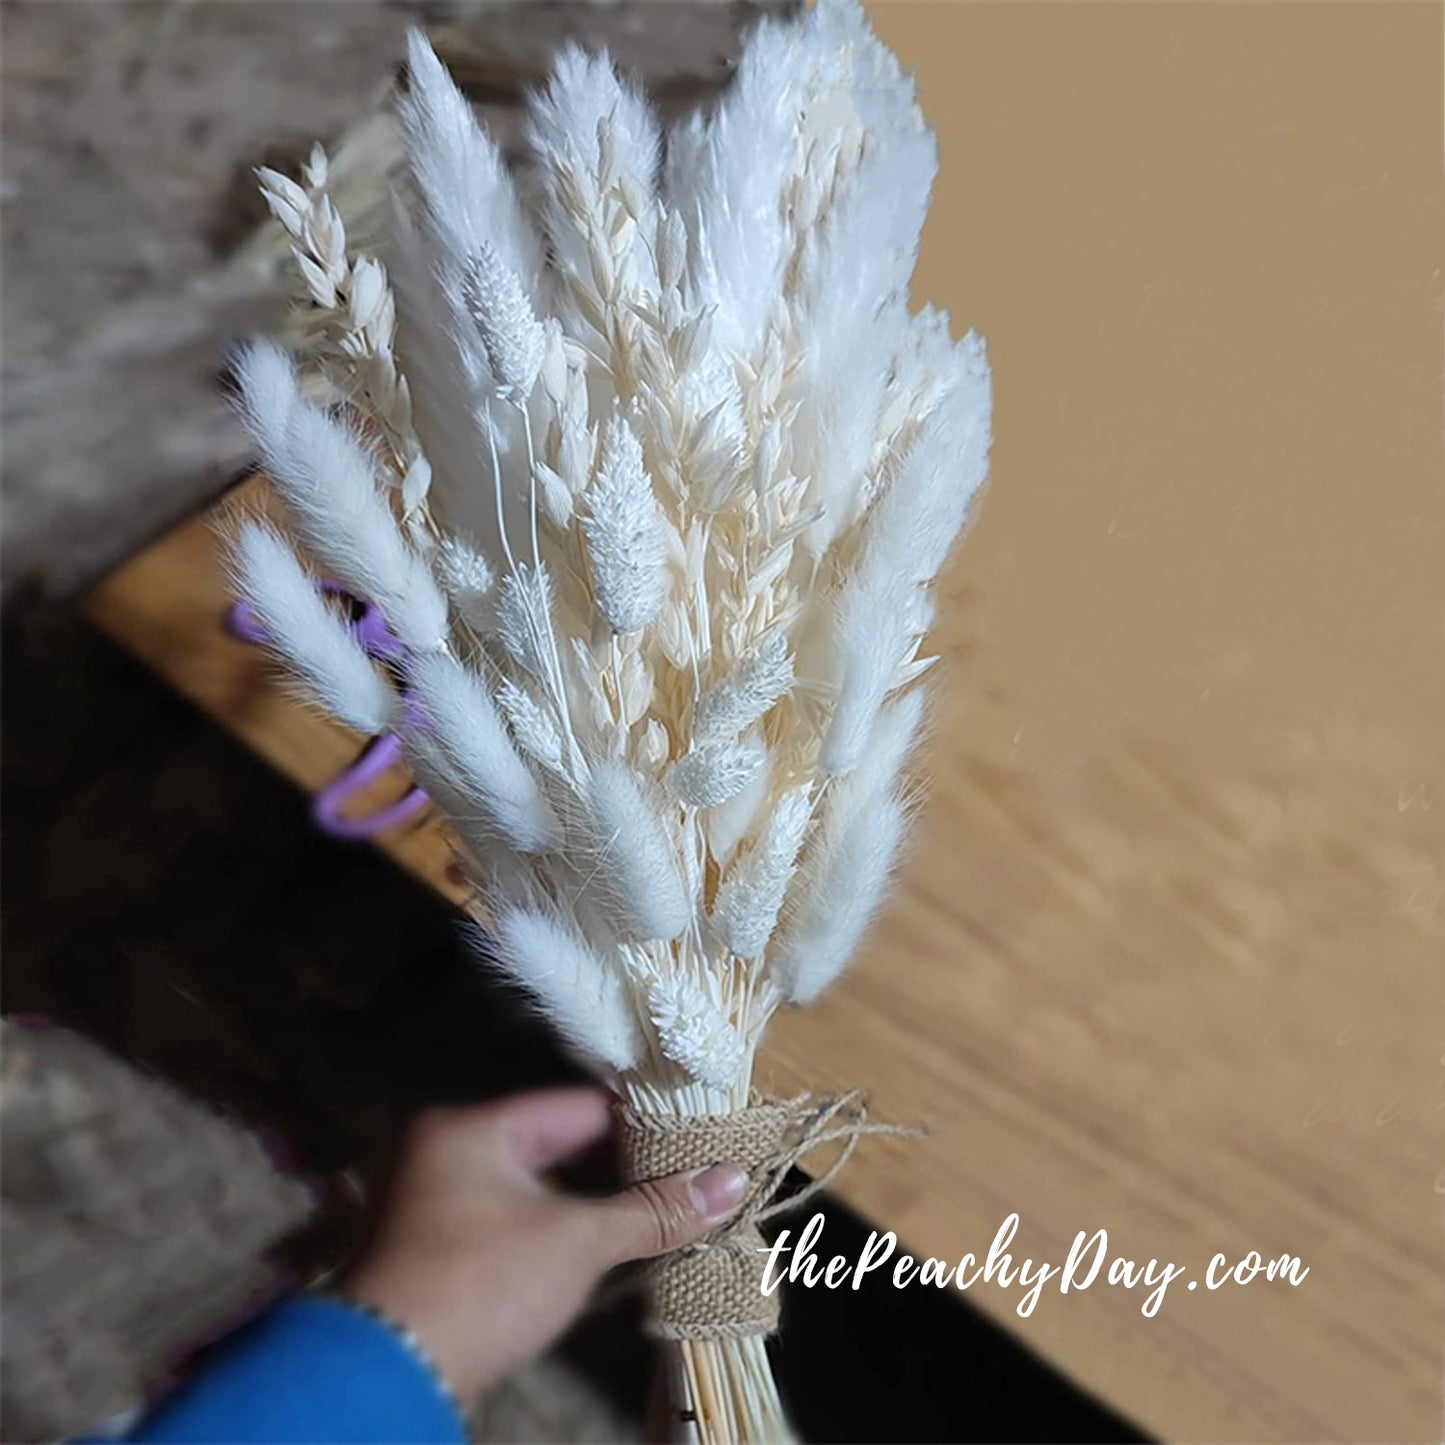 17" Dried Pampas Bunny Tail Bouquet